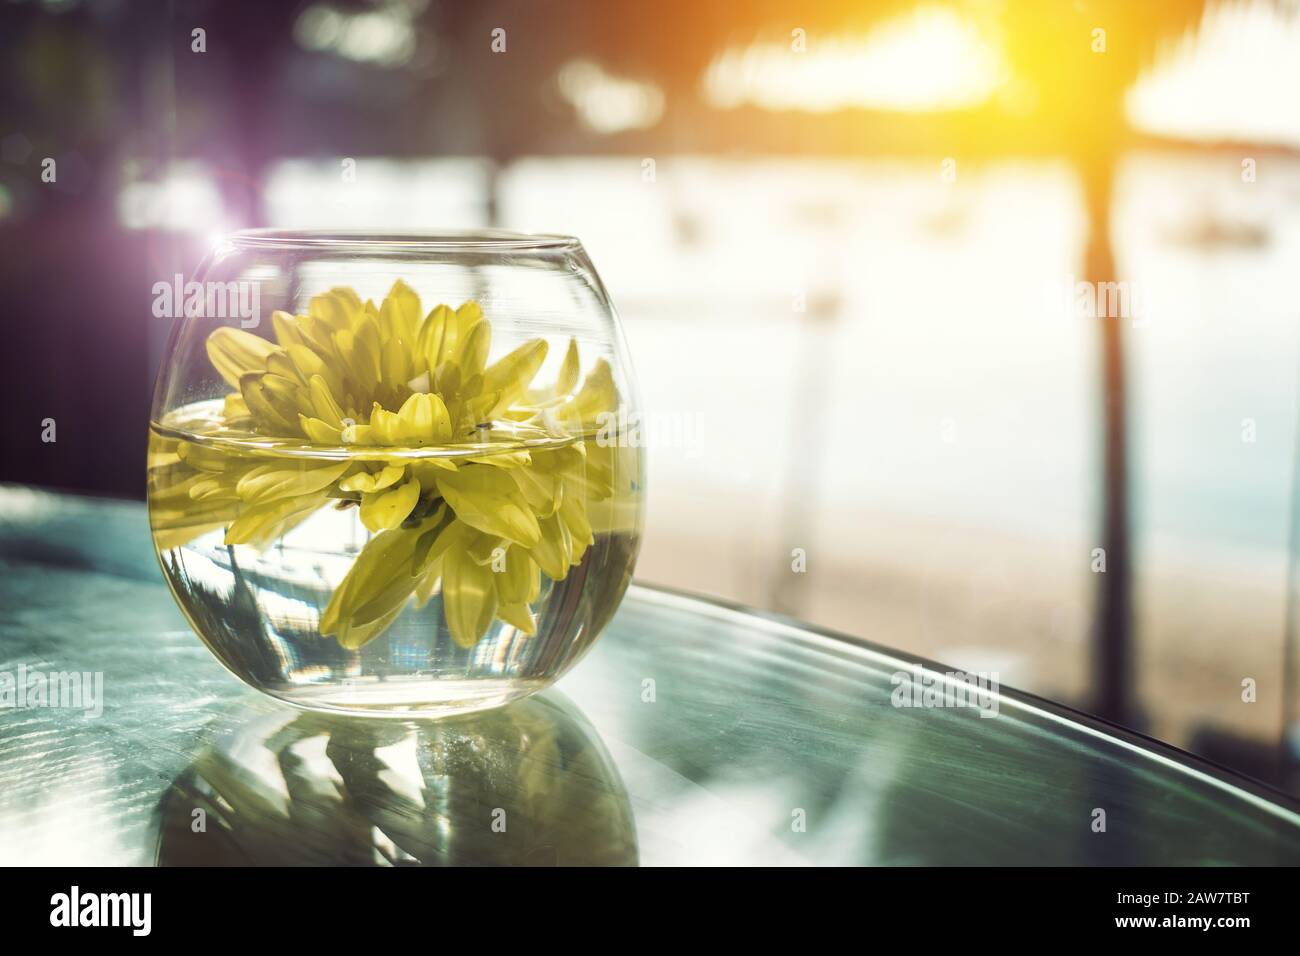 fresh yellow flower floating on the water in short vase with morning light, joyful home decoration Stock Photo